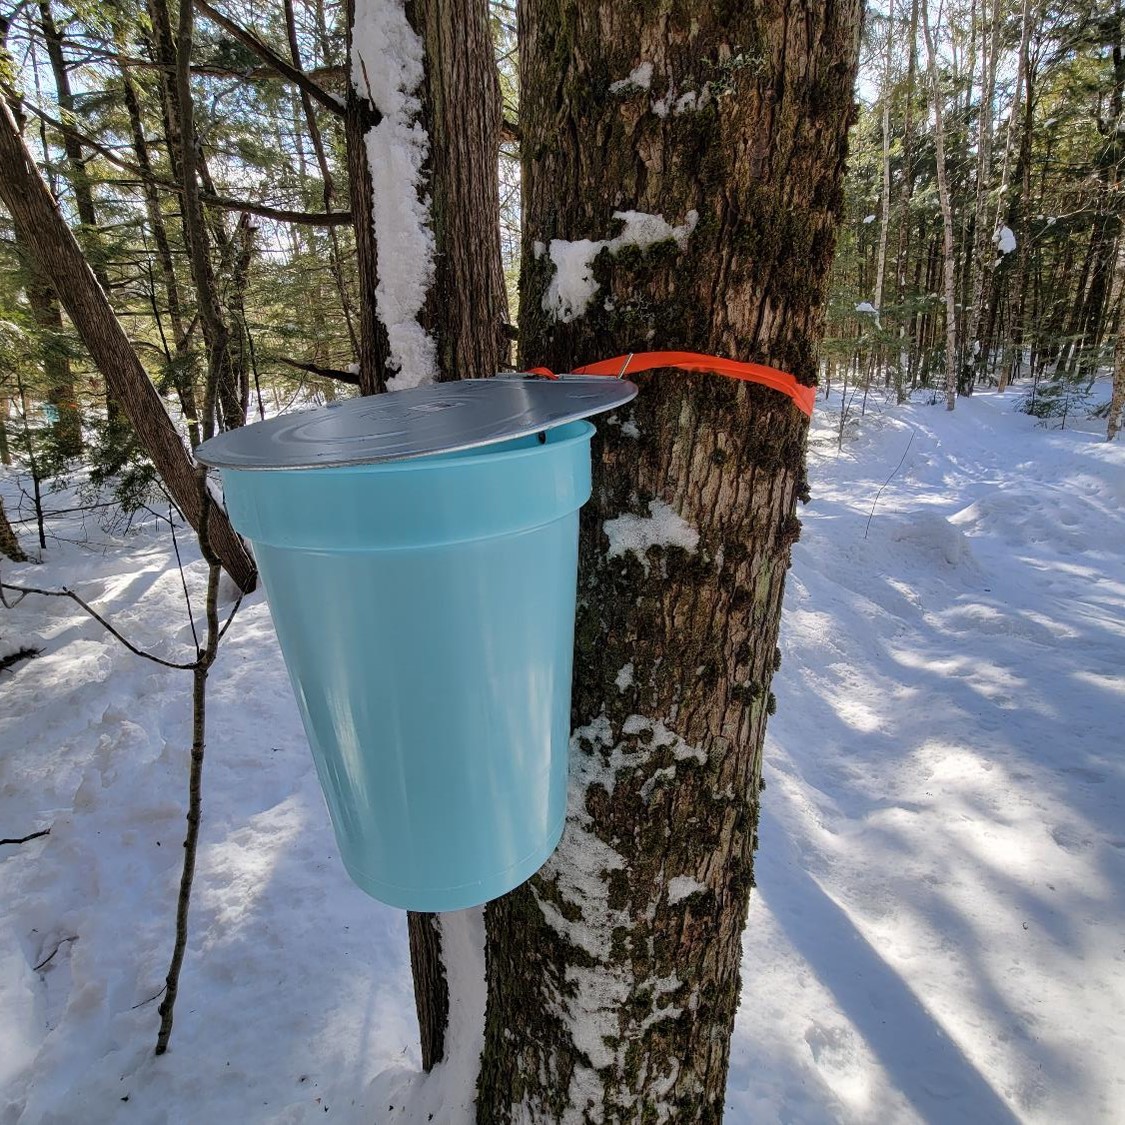 A Maine maple tree at work in March.